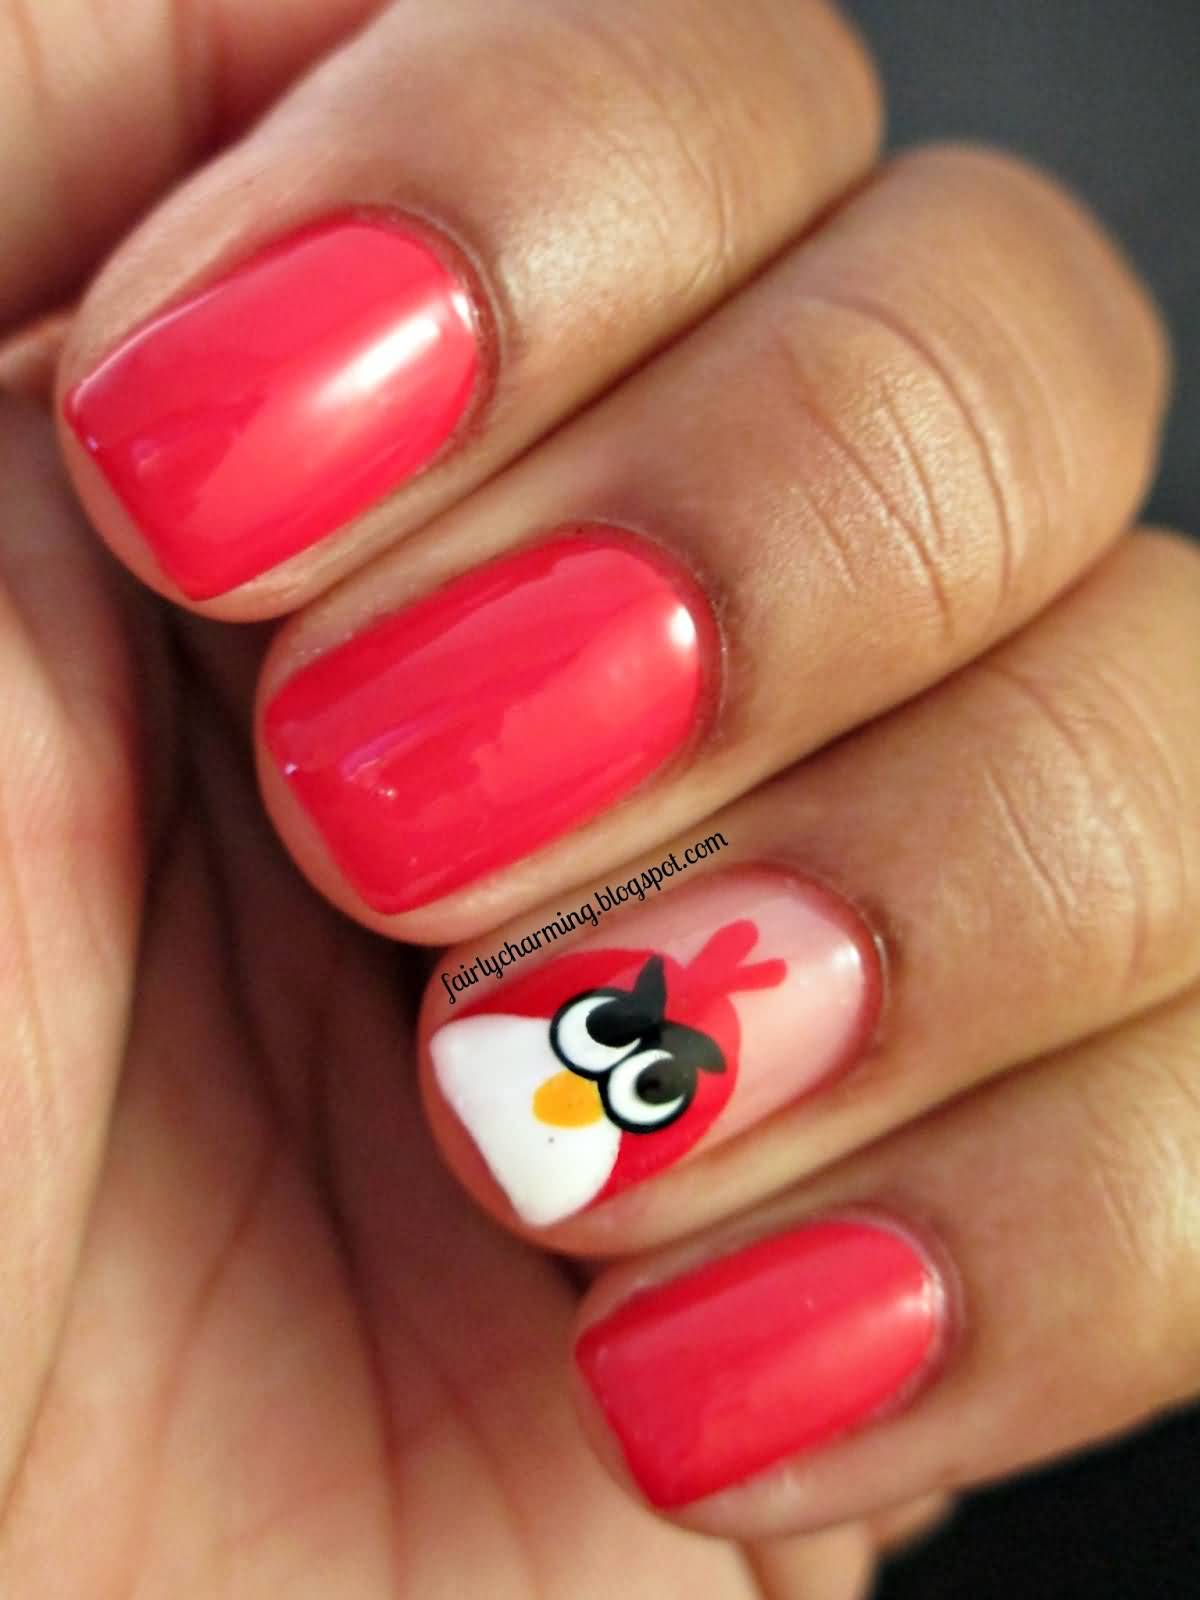 Pink Glossy Nails With Accent Angry Birds Nail Art